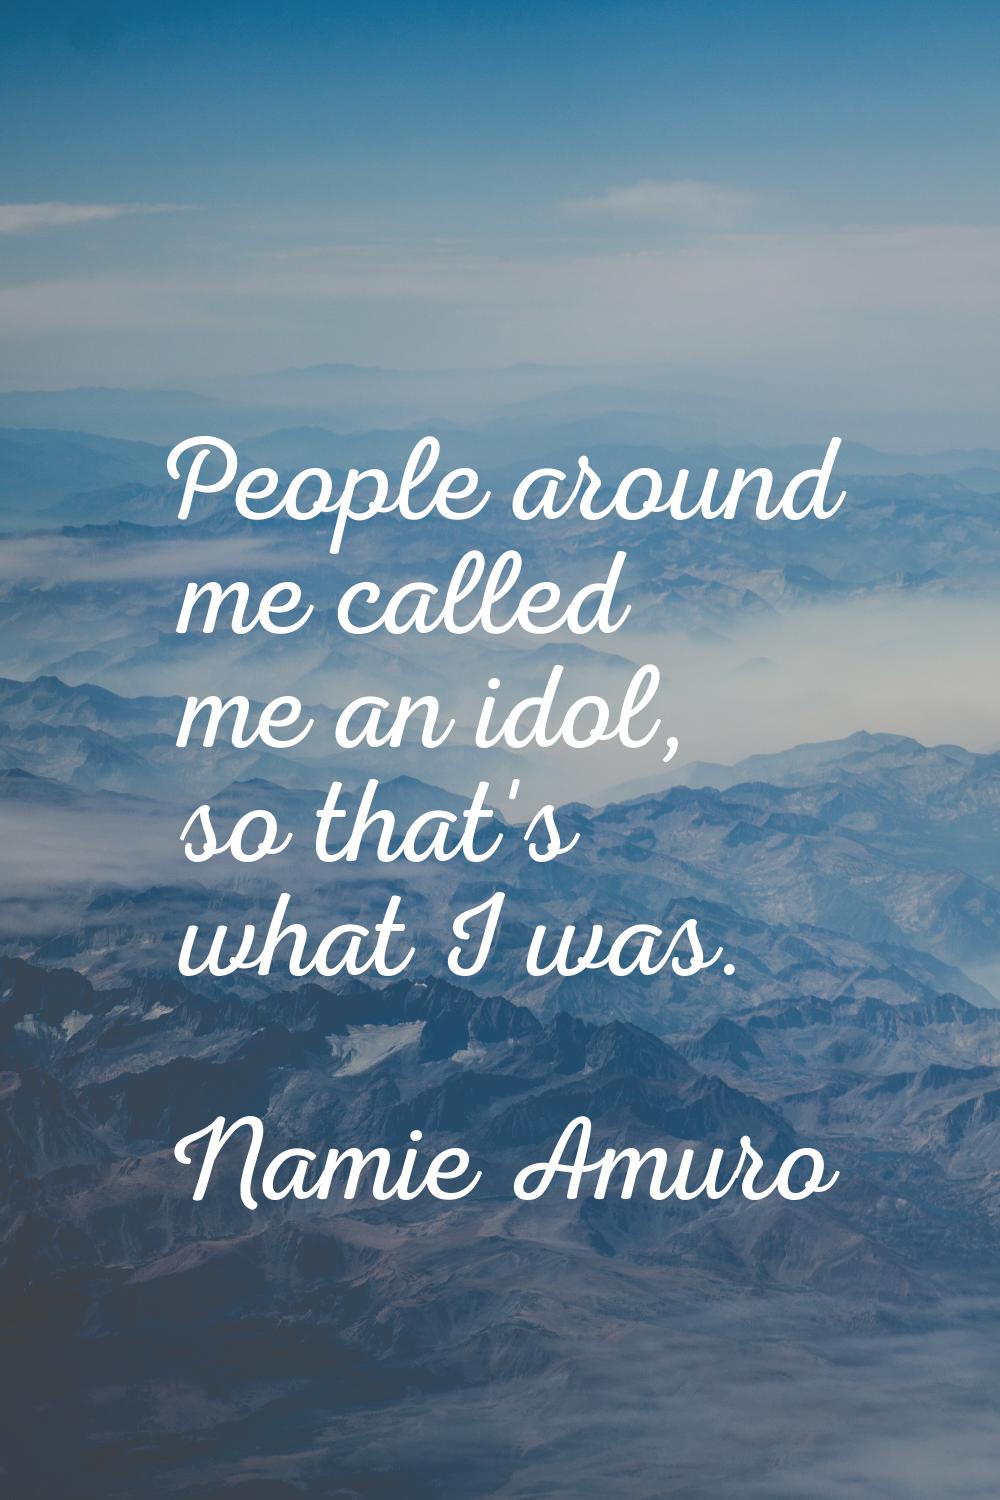 People around me called me an idol, so that's what I was.